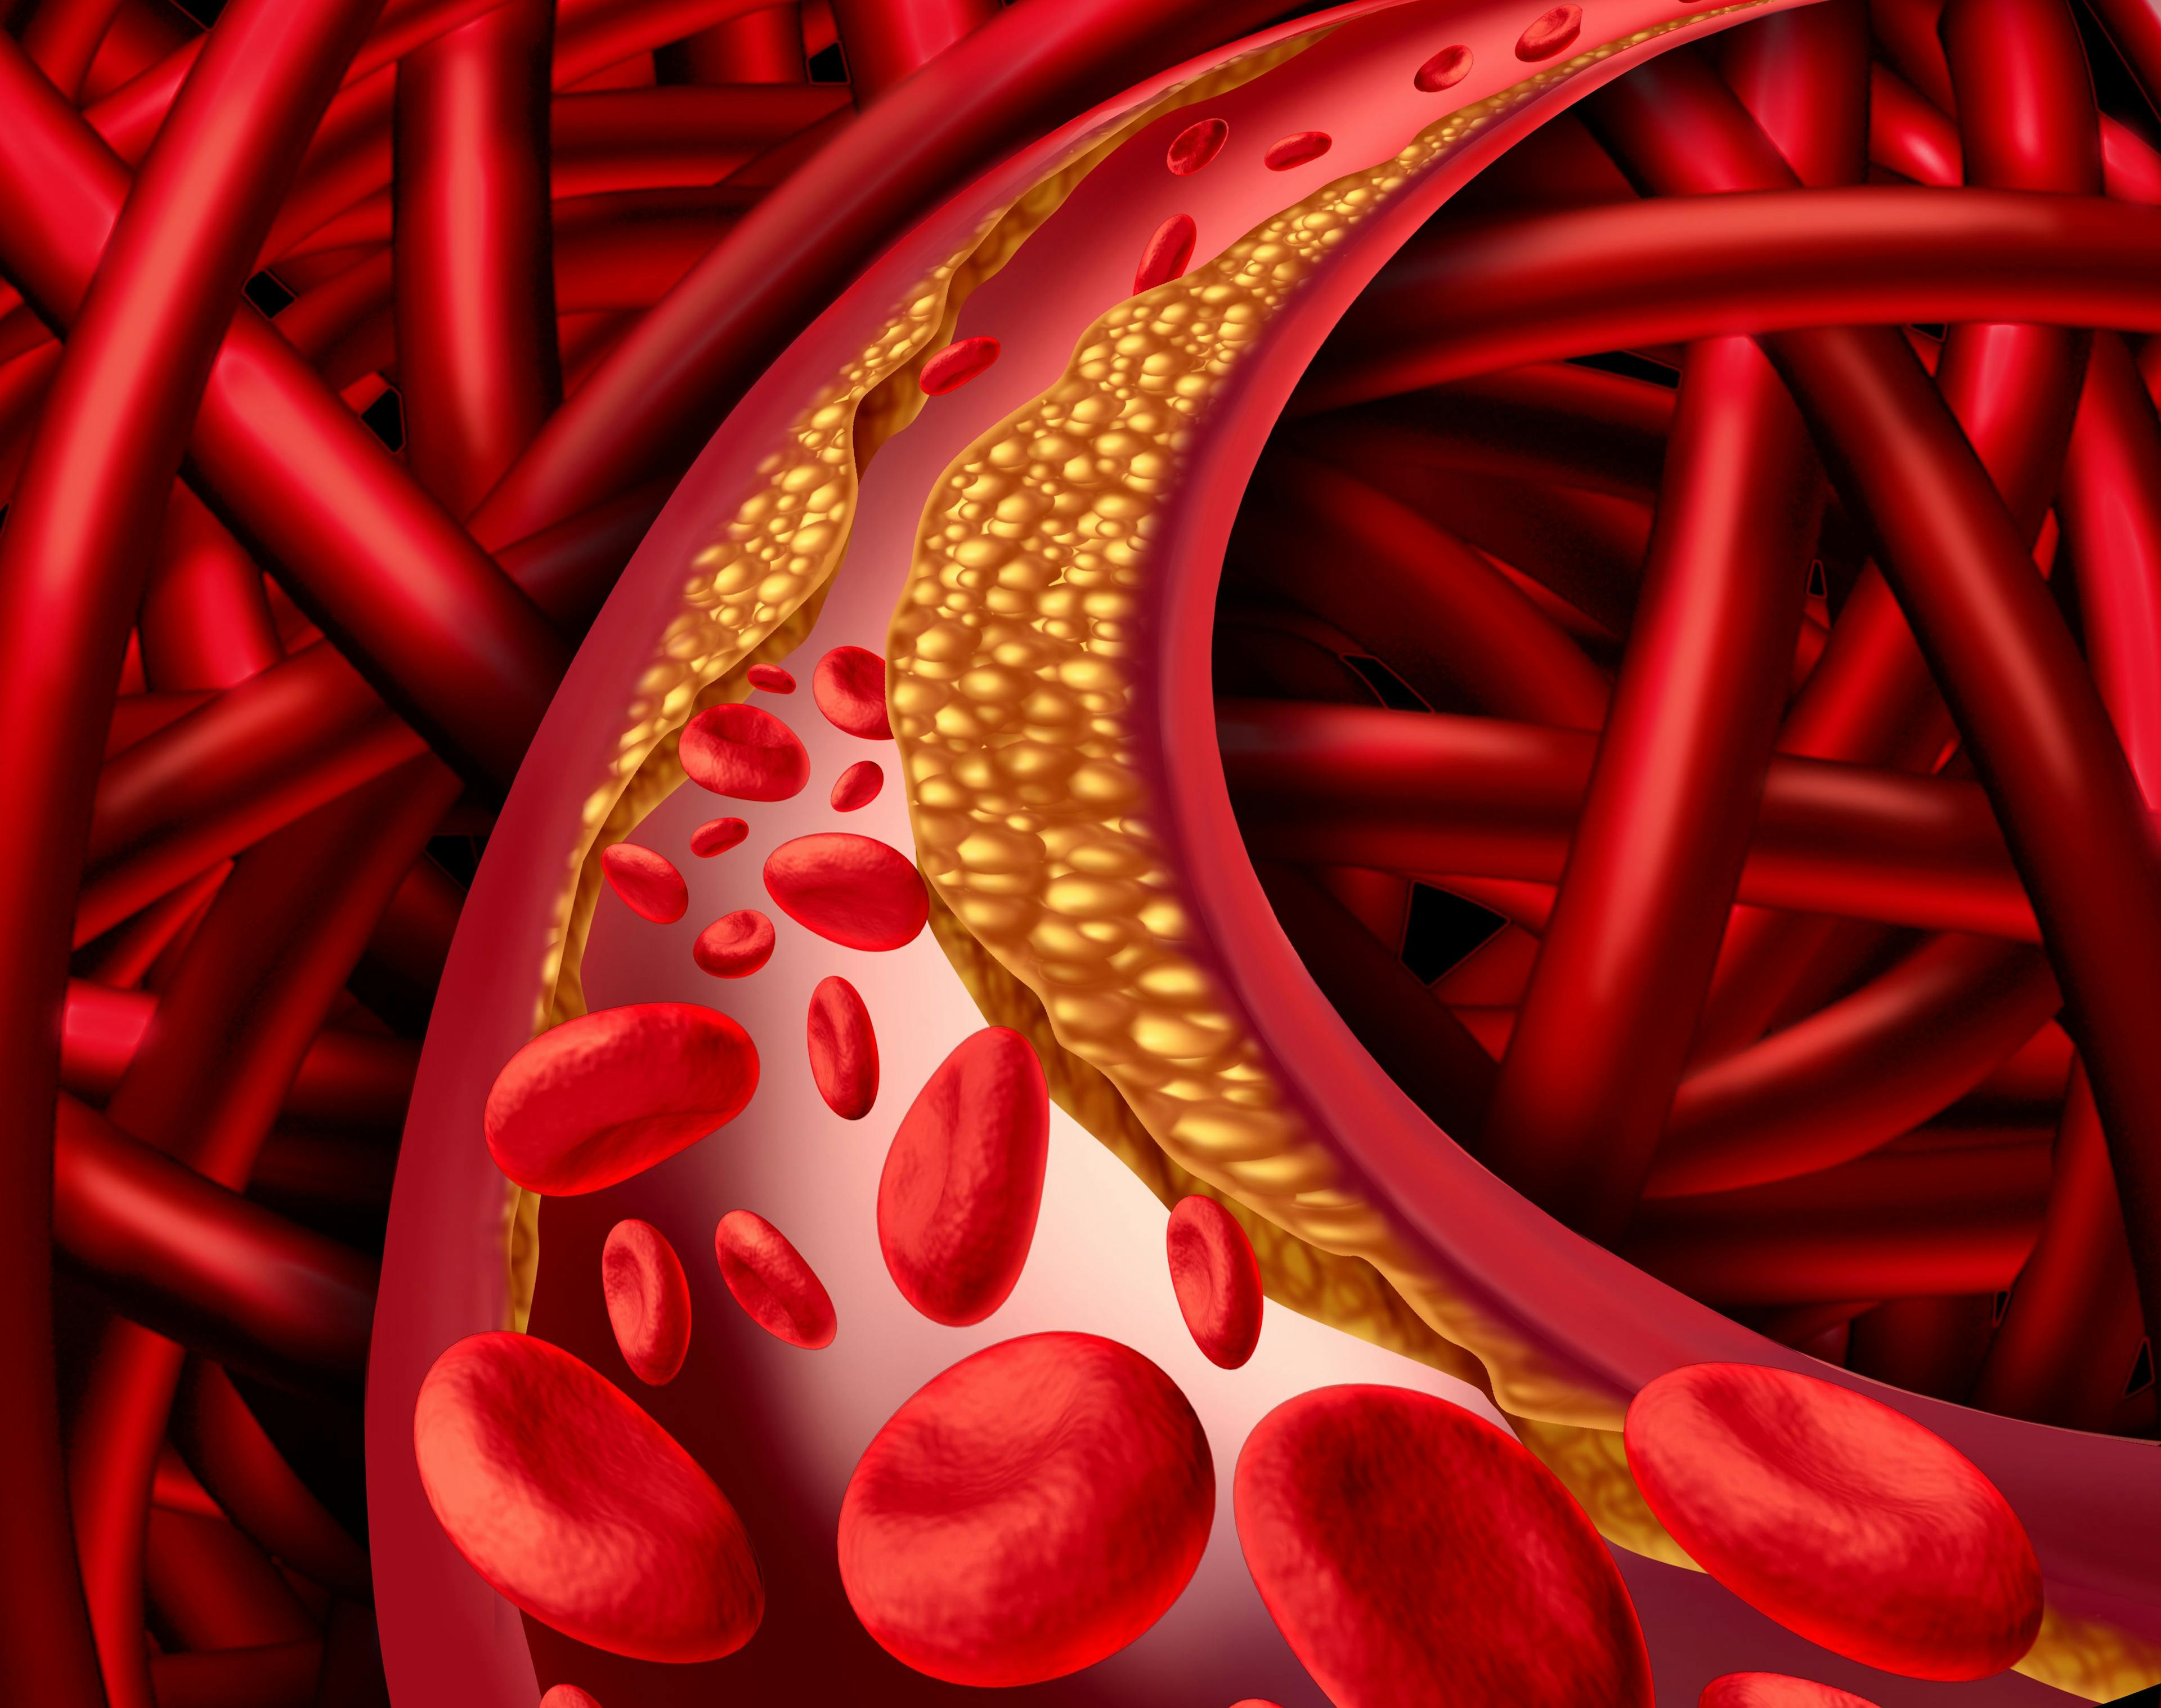 Become Familiar with VTE Treatment and Anticoagulation Management